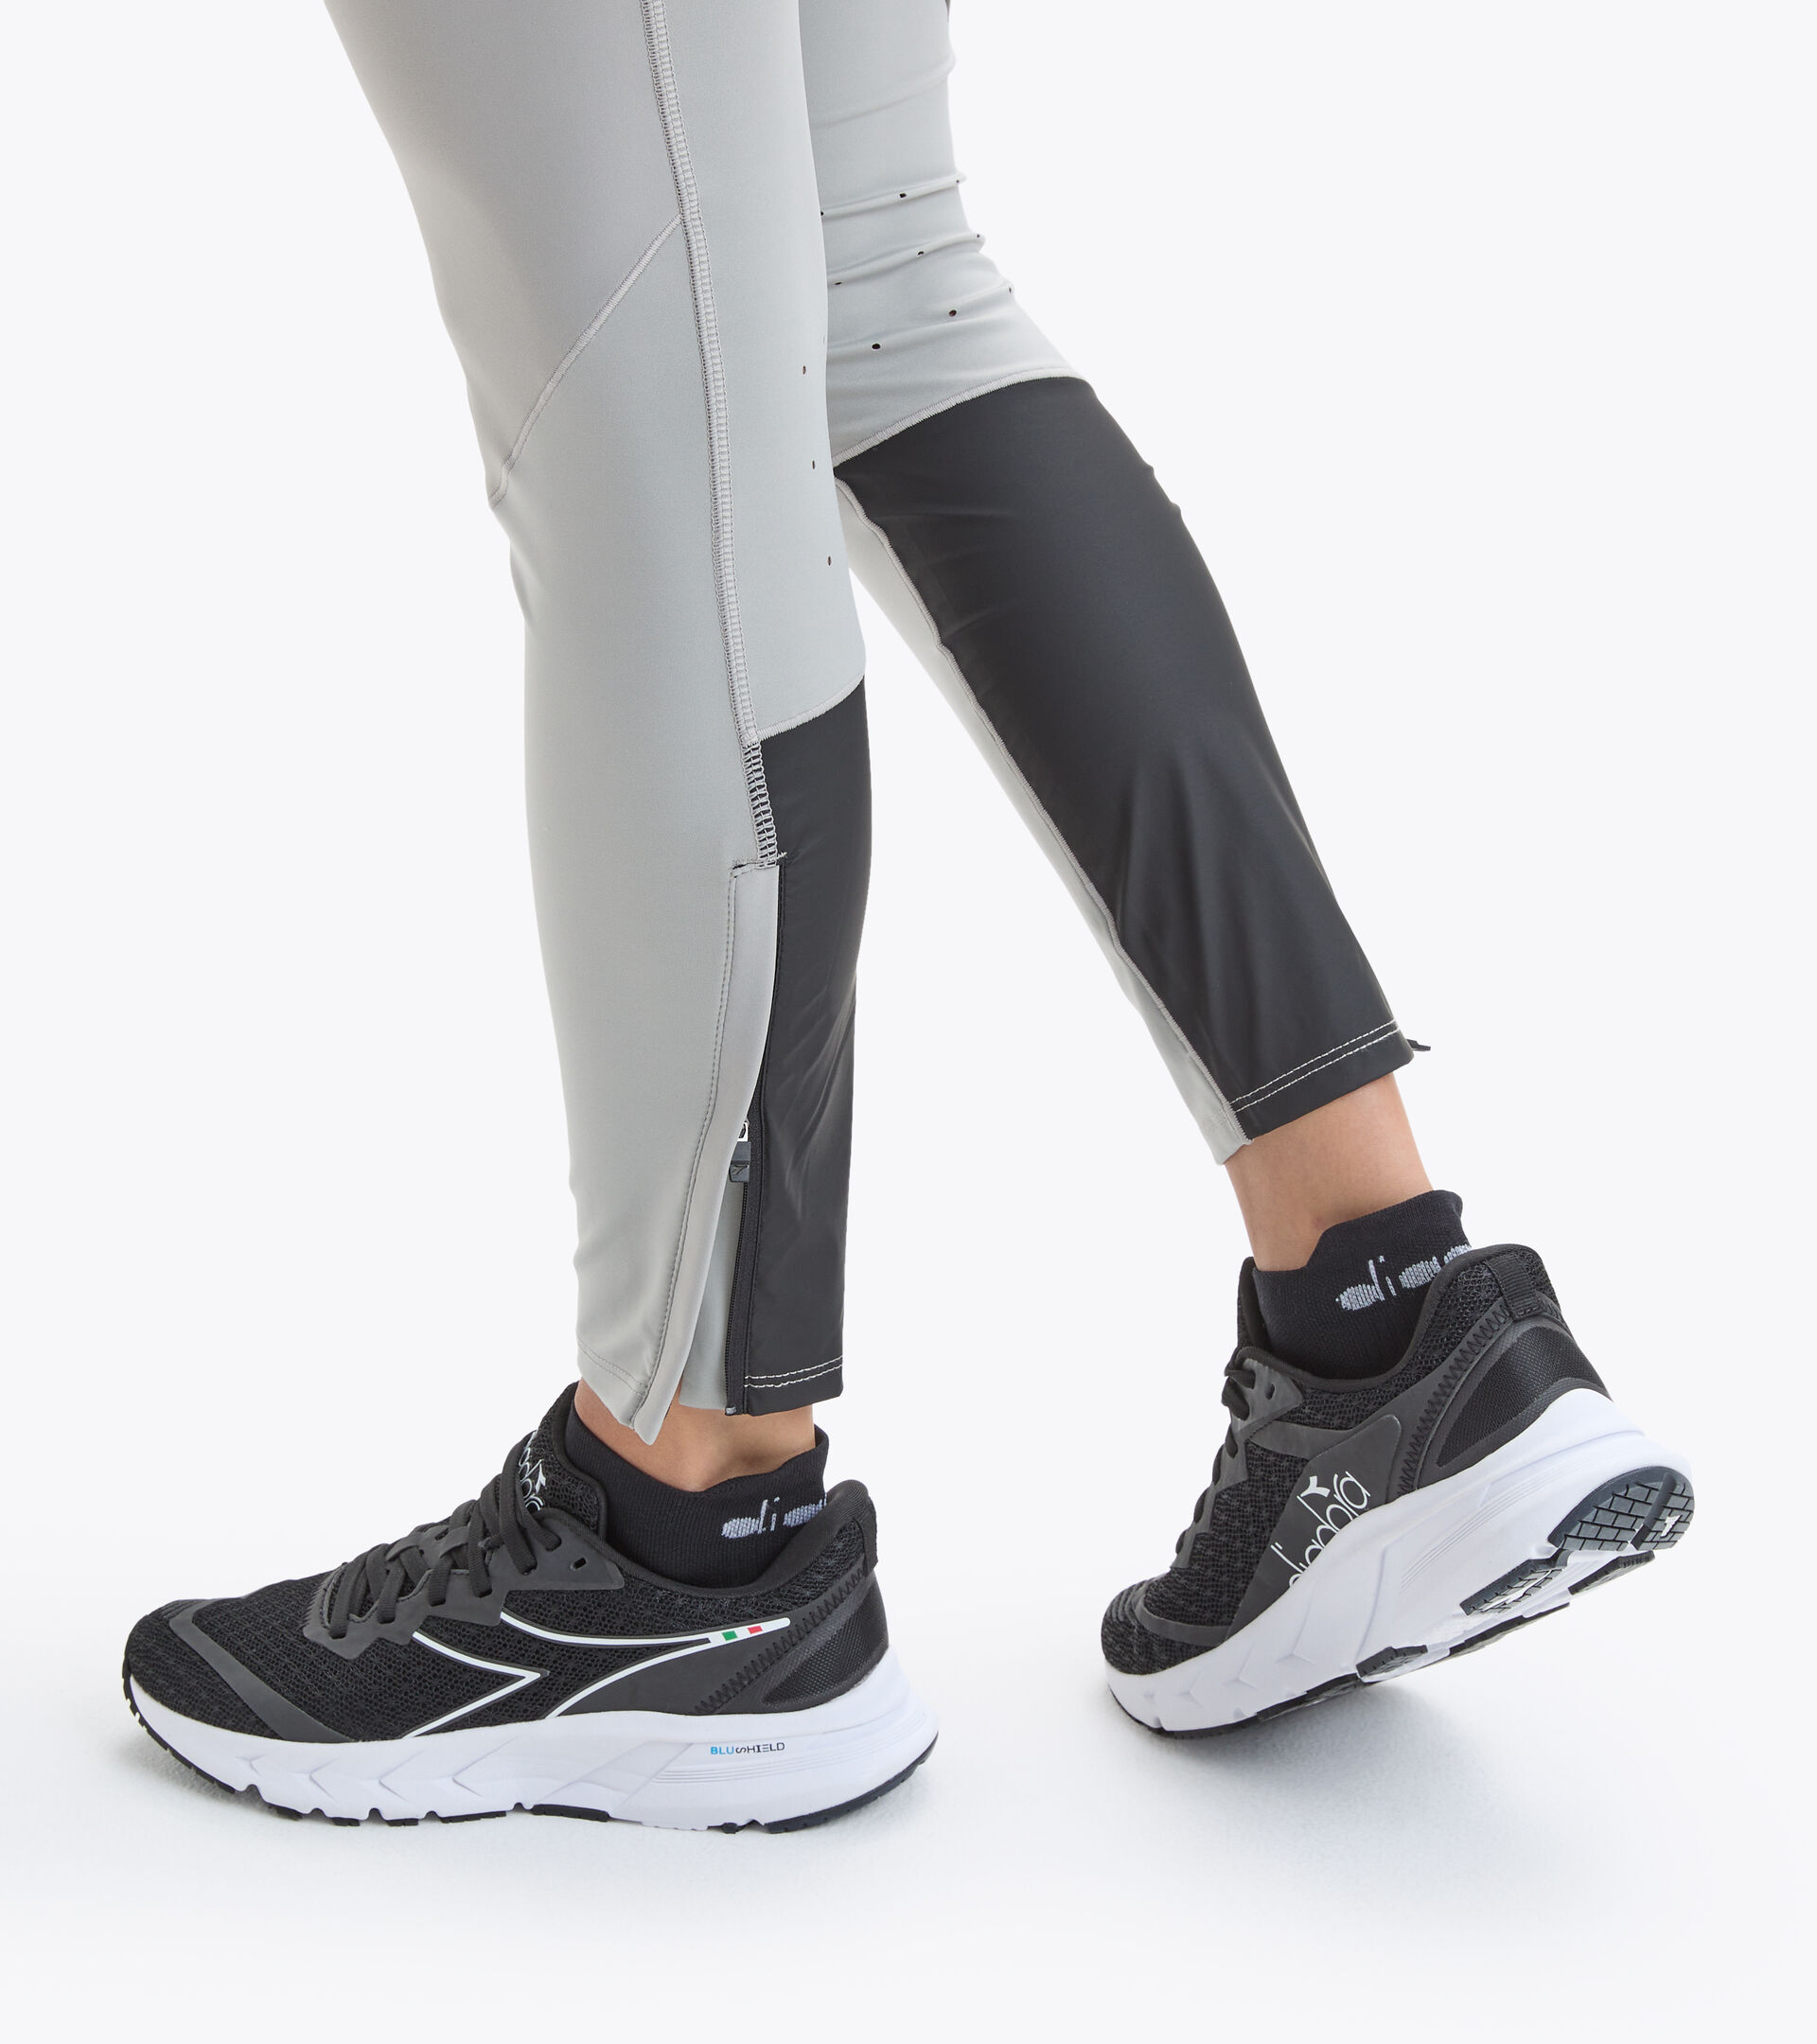 Discover winter running leggings and tights